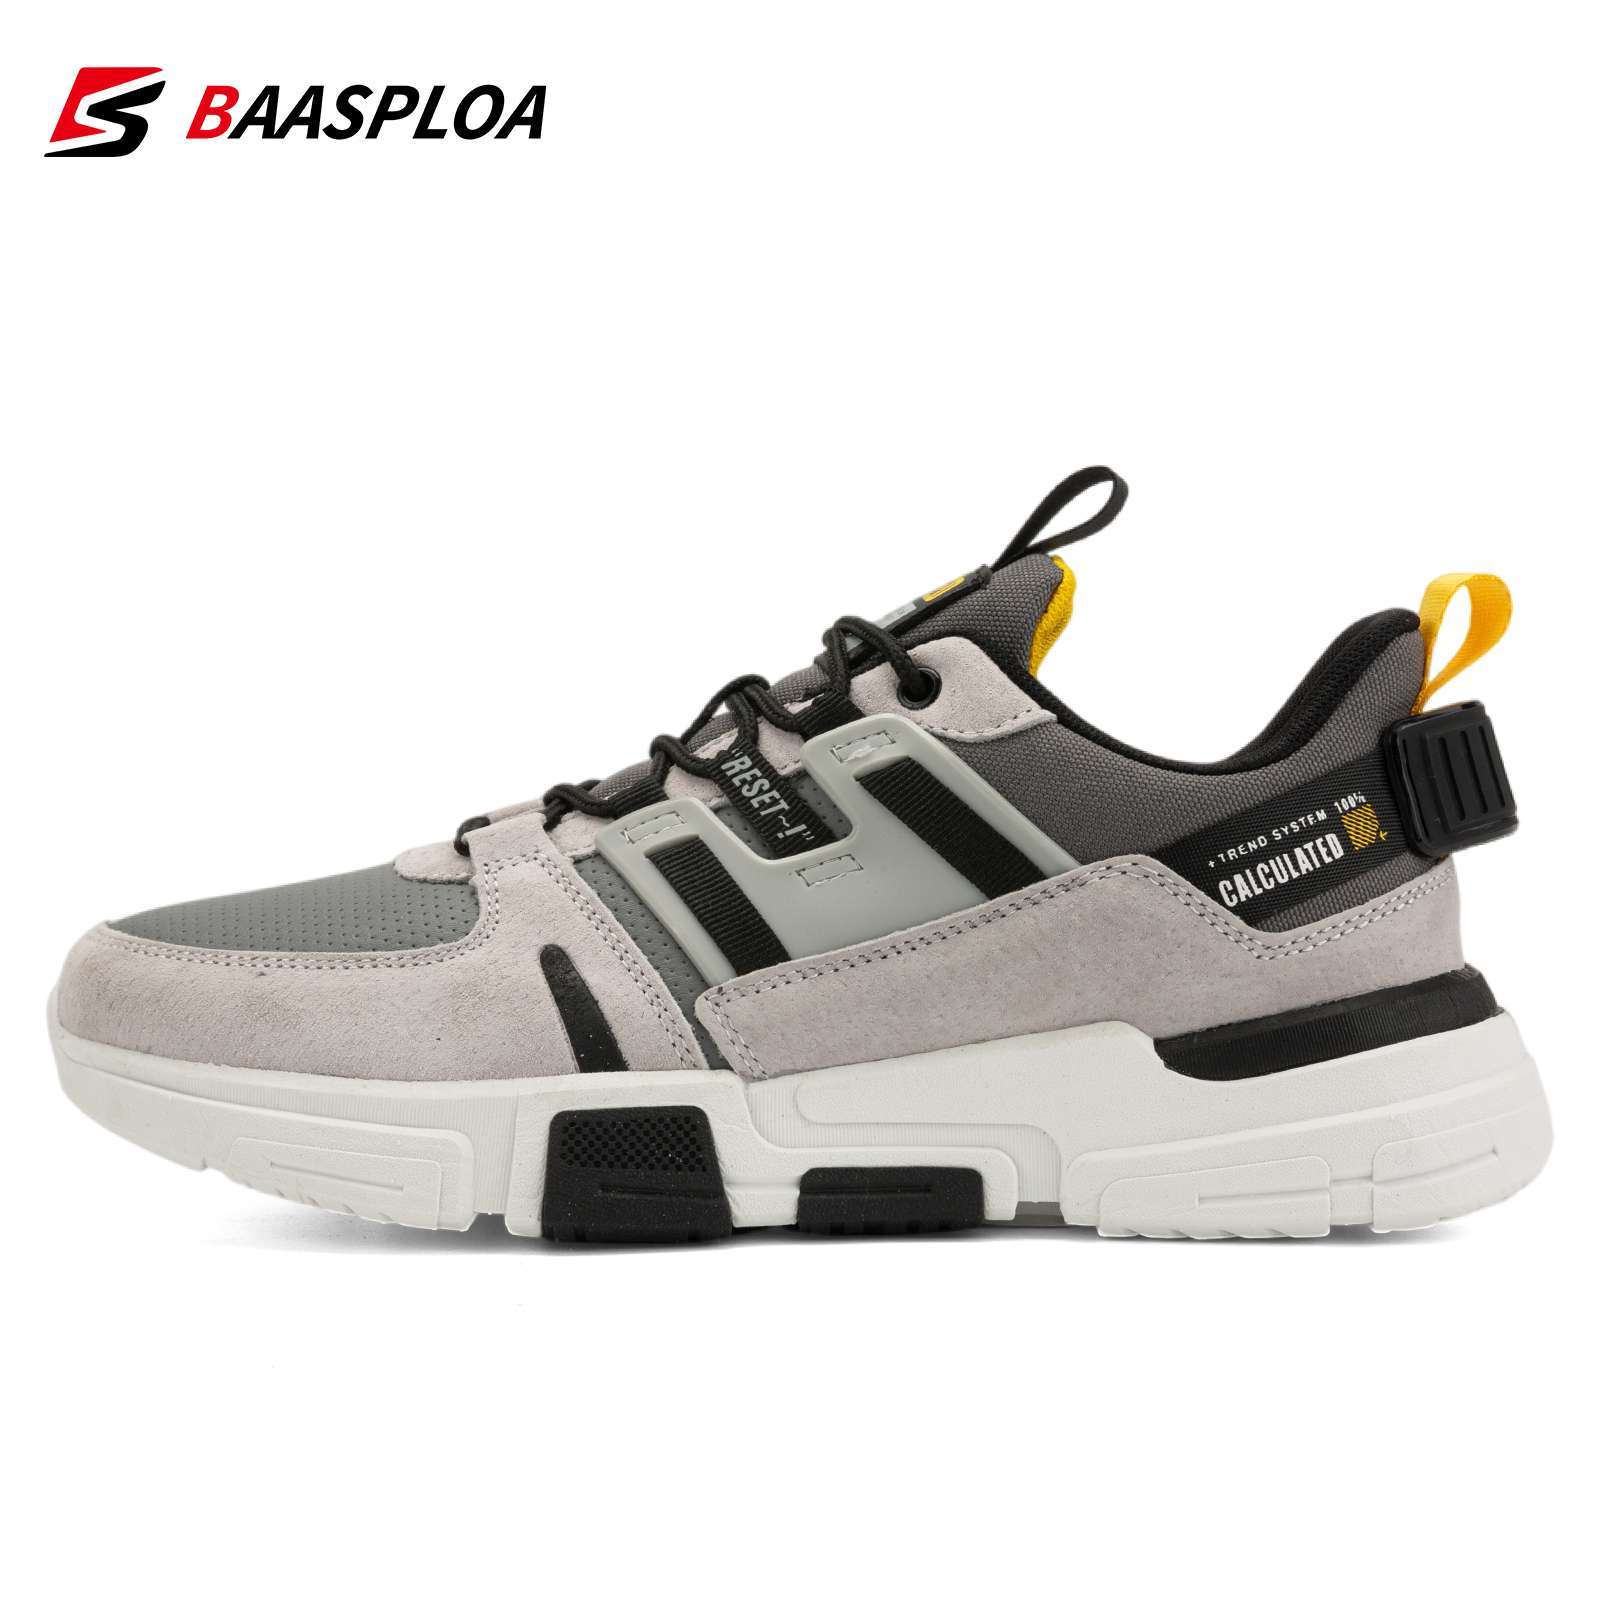 Baasploa Men Sneakers Leather Casual Walking Shoes Non slip Fashion Sneakers Comfortable Male Lace up Tenis